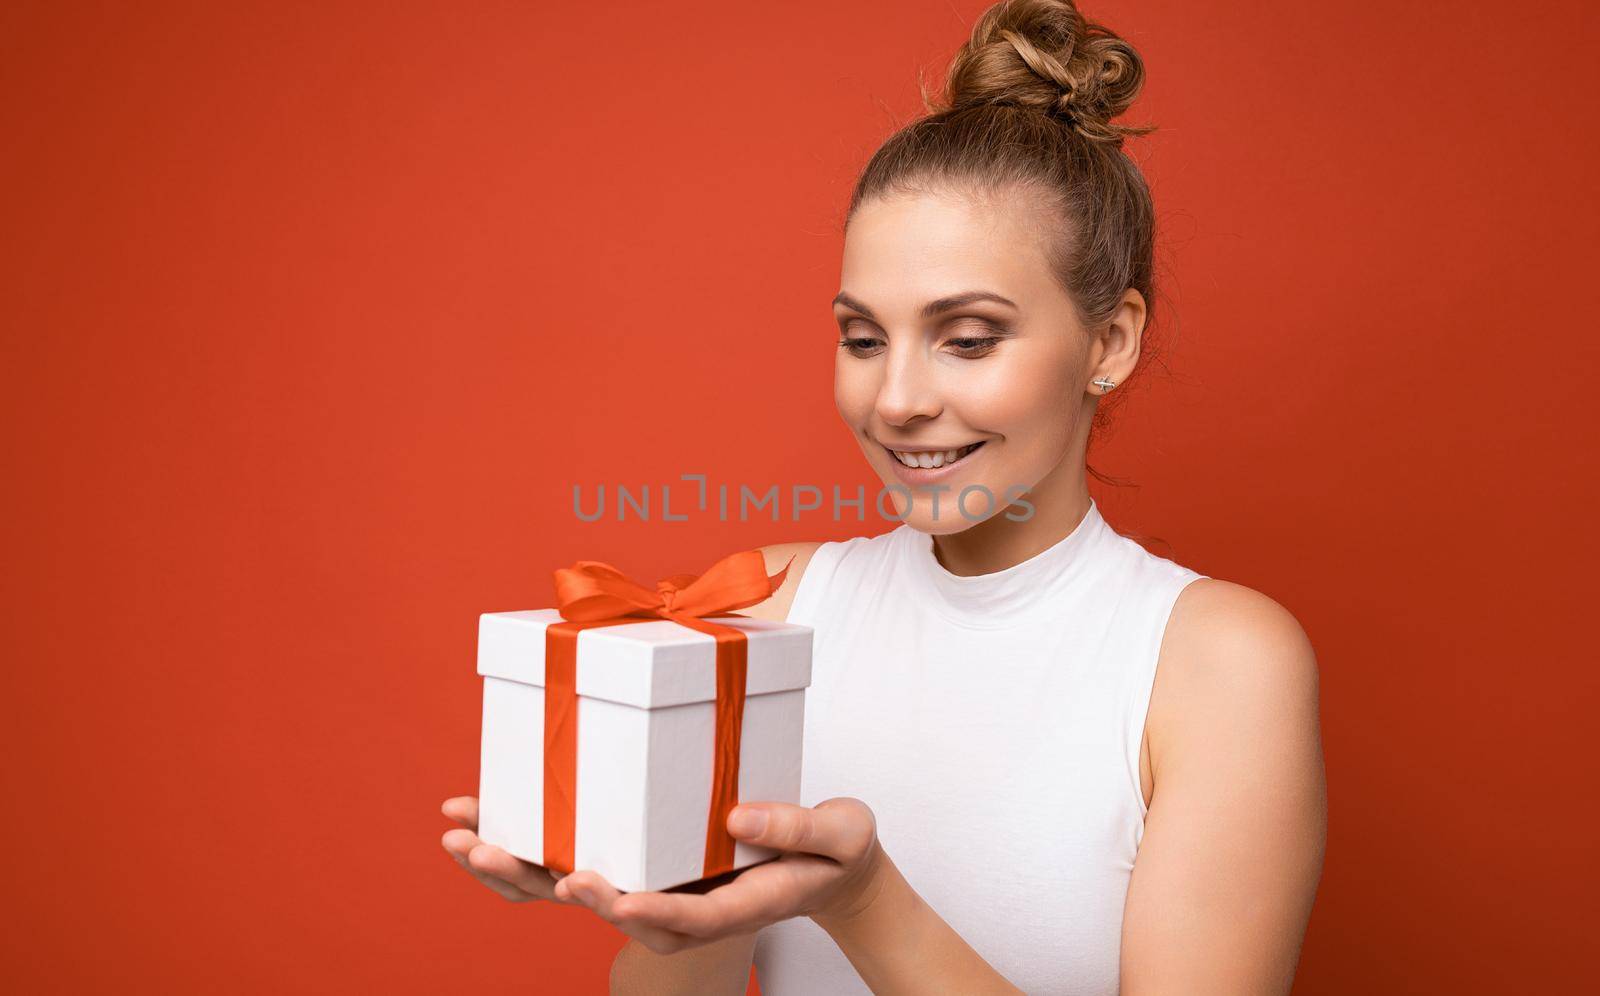 Photo shot of beautiful positive smiling young blonde woman isolated over red background wall wearing white top holding gift box and looking at present.